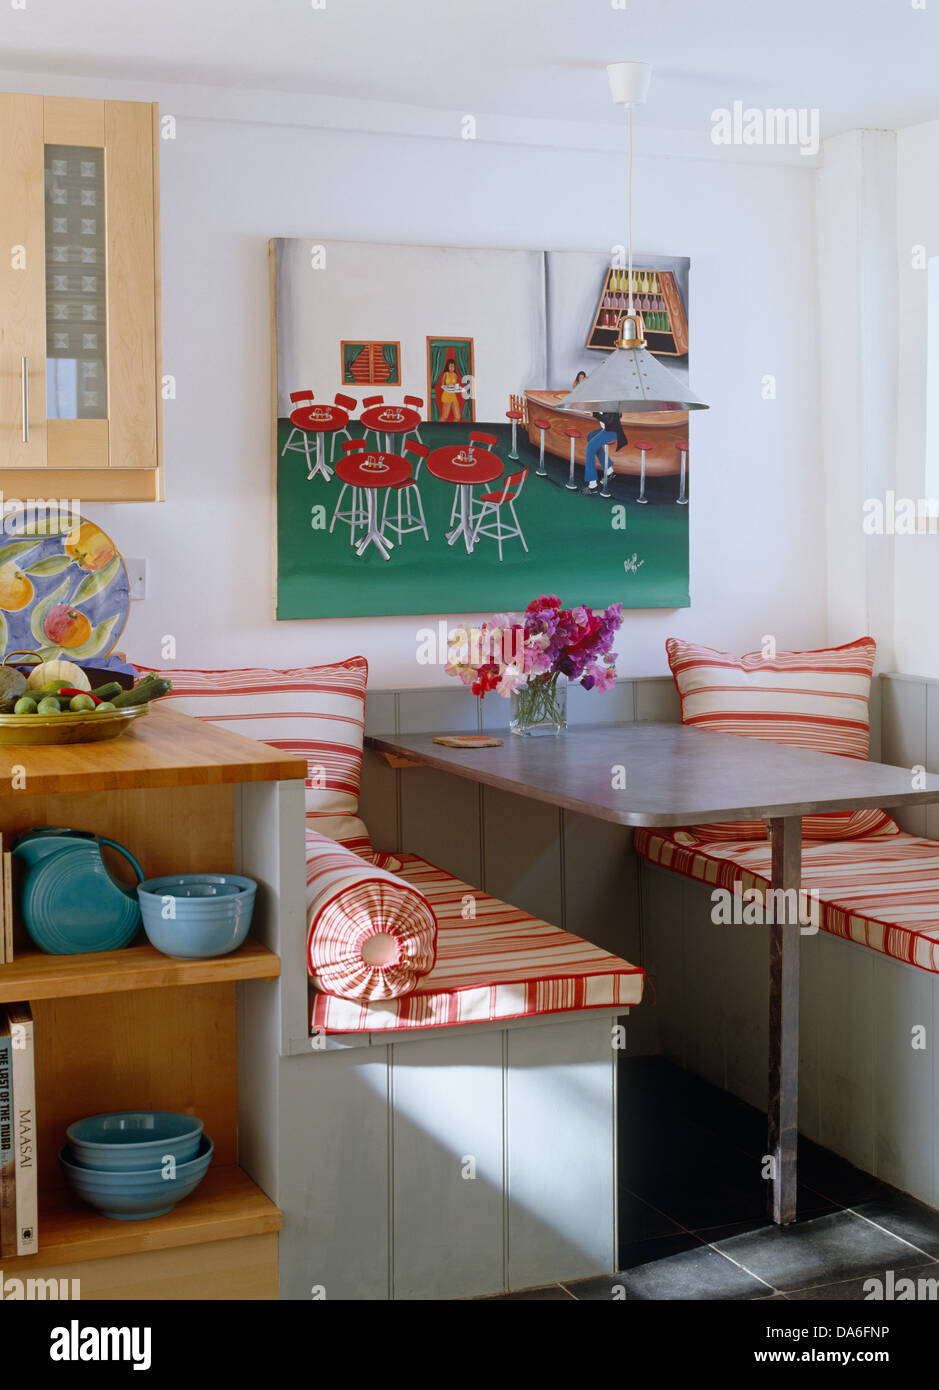 Colorful painting on wall behind fixed metal table and built in seating with red striped cushions in corner of country kitchen Stock Photo